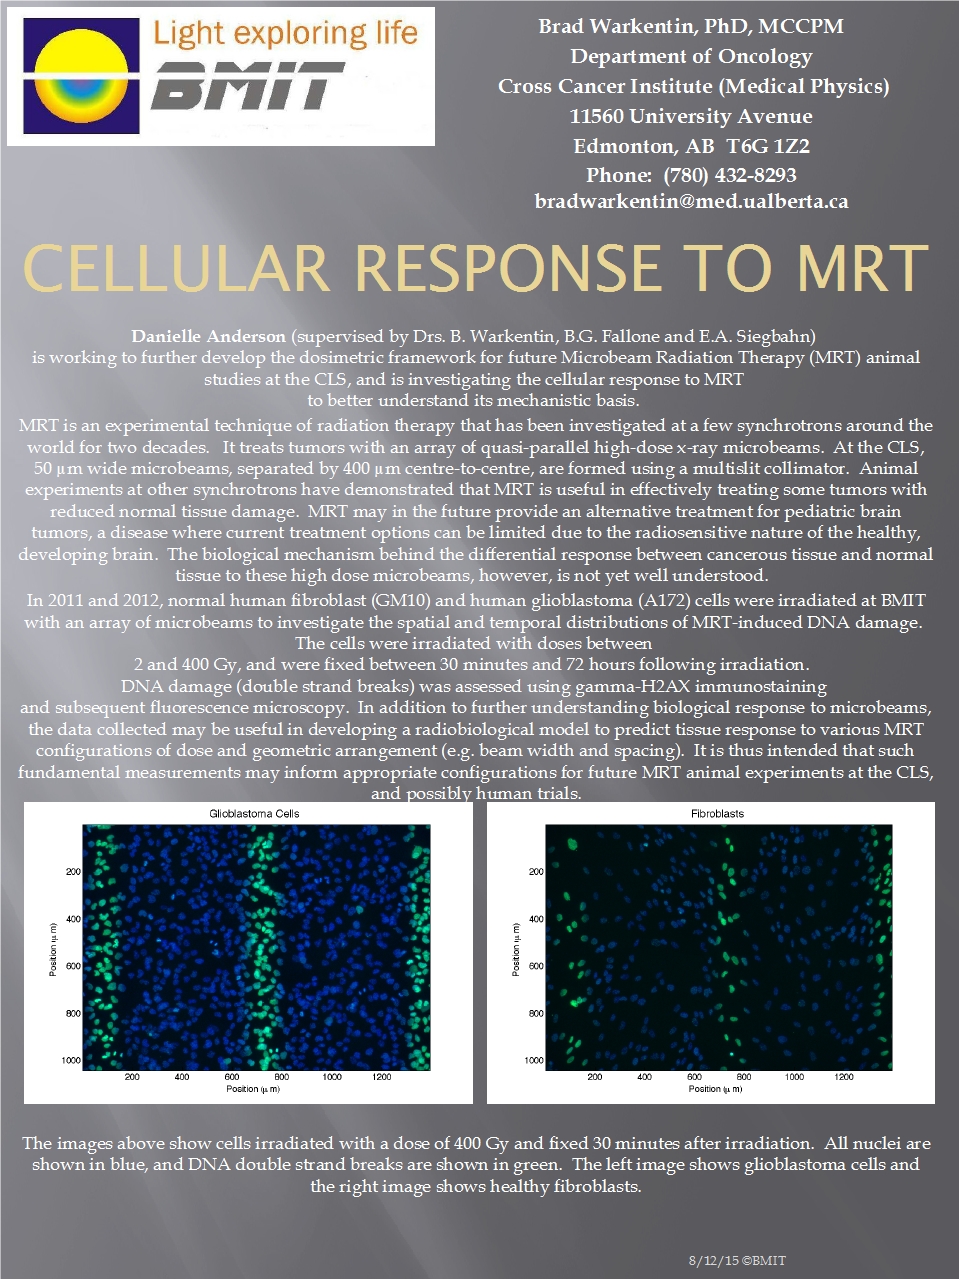 Cellular Response to Microbeam Radiation Therapy (MRT) Image